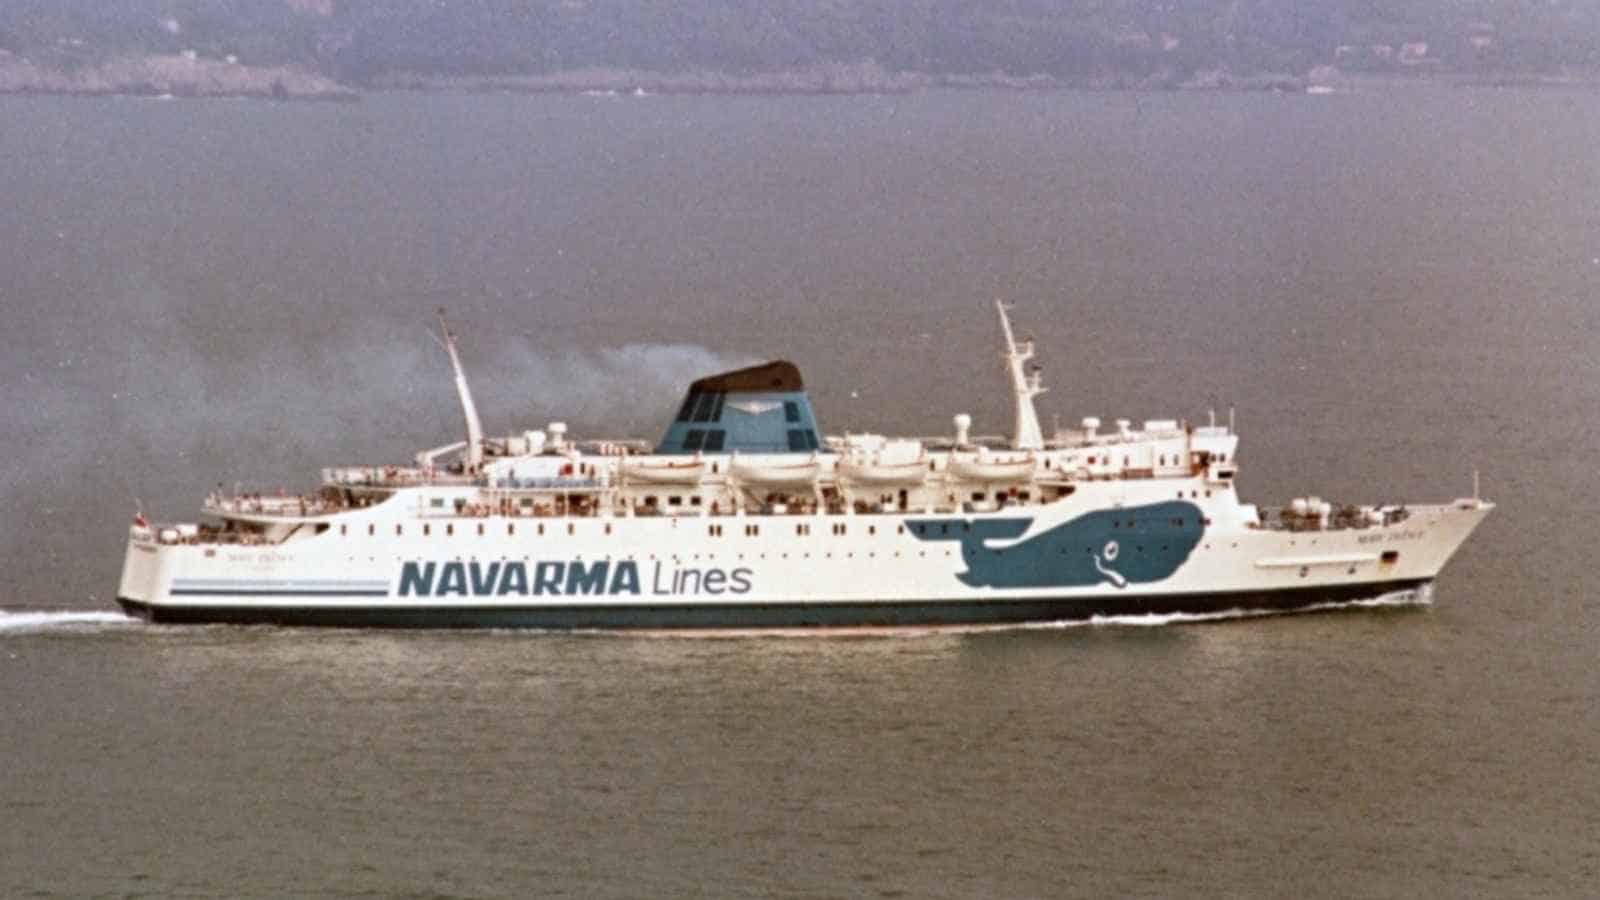 <p>In 1991, the Italian ferry Moby Prince collided with an oil tanker in Livorno harbor, resulting in a fire that killed 140 people. This disaster was caused by a series of navigational errors and miscommunication between the two ships.</p><p>The Moby Prince disaster highlighted the importance of proper communication and coordination among ships at sea. It also brought attention to the need for stricter enforcement of safety regulations, especially in heavily trafficked areas.</p>